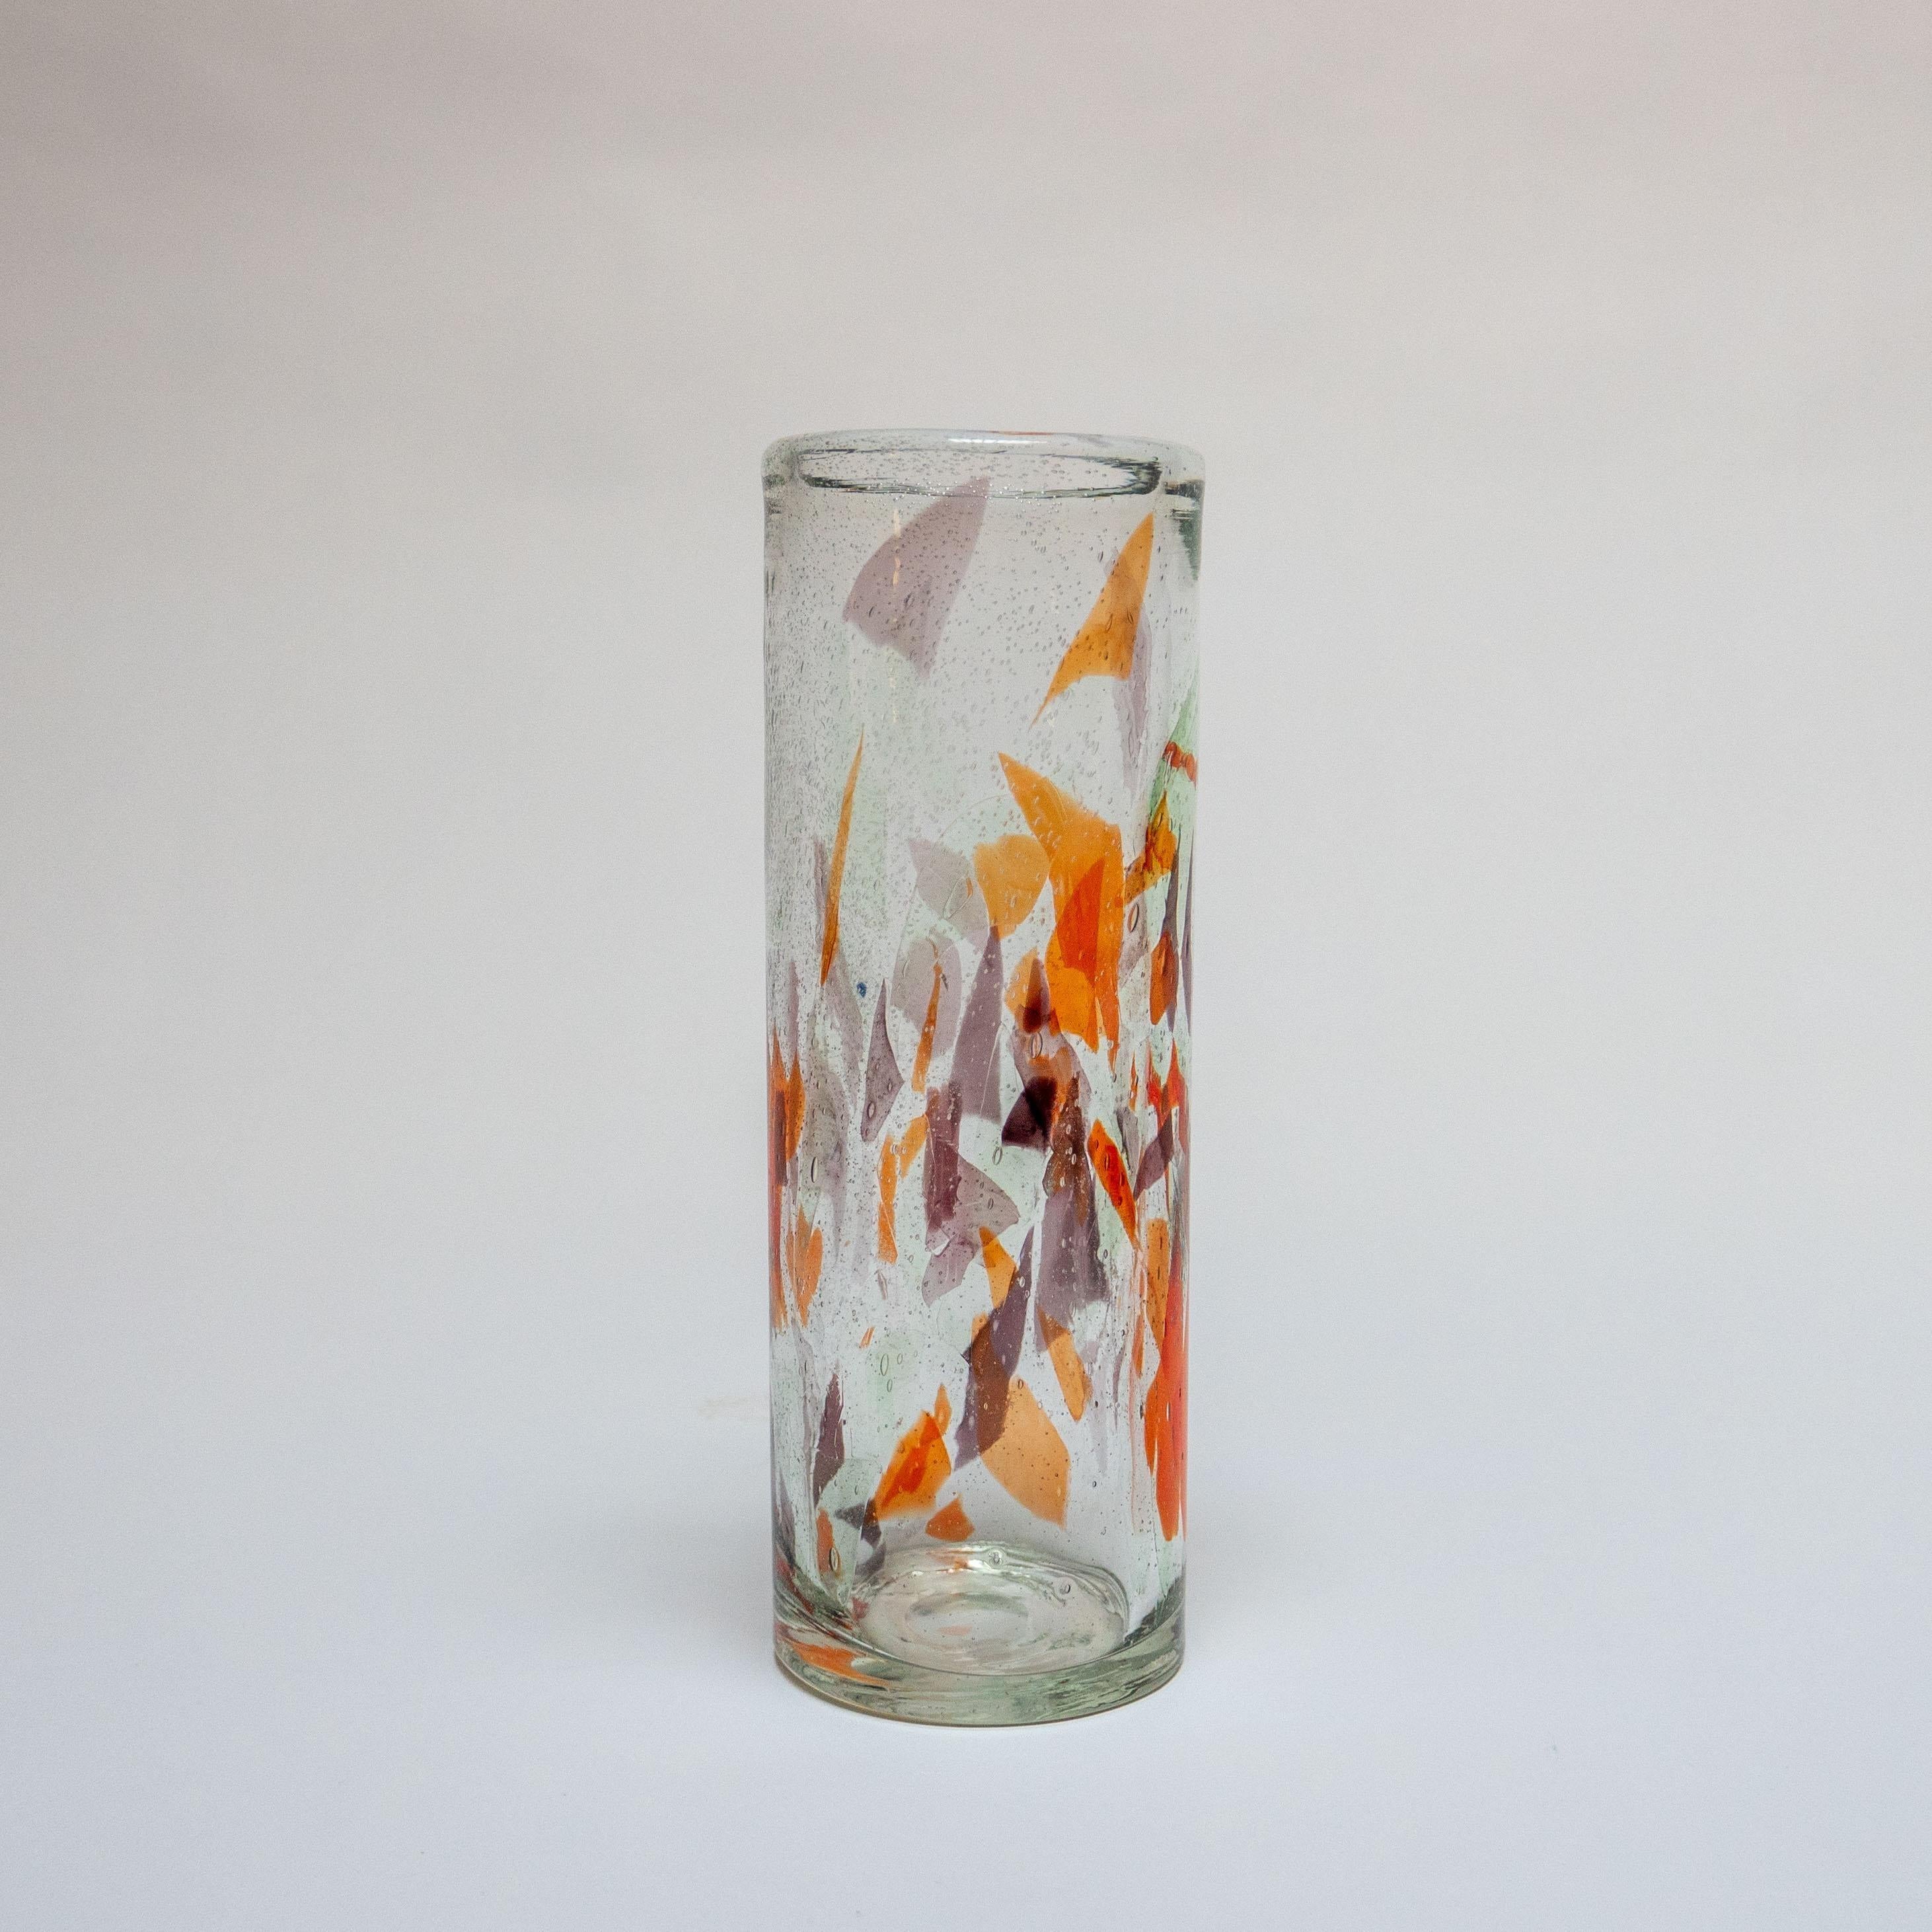 Confetti are a symbol of the world renowned venetian carnival, so in a way it only makes sense to find them (sort of) into another world famous craft product from the floating city. This vintage Murano glass vase has indeed inlaid shards of